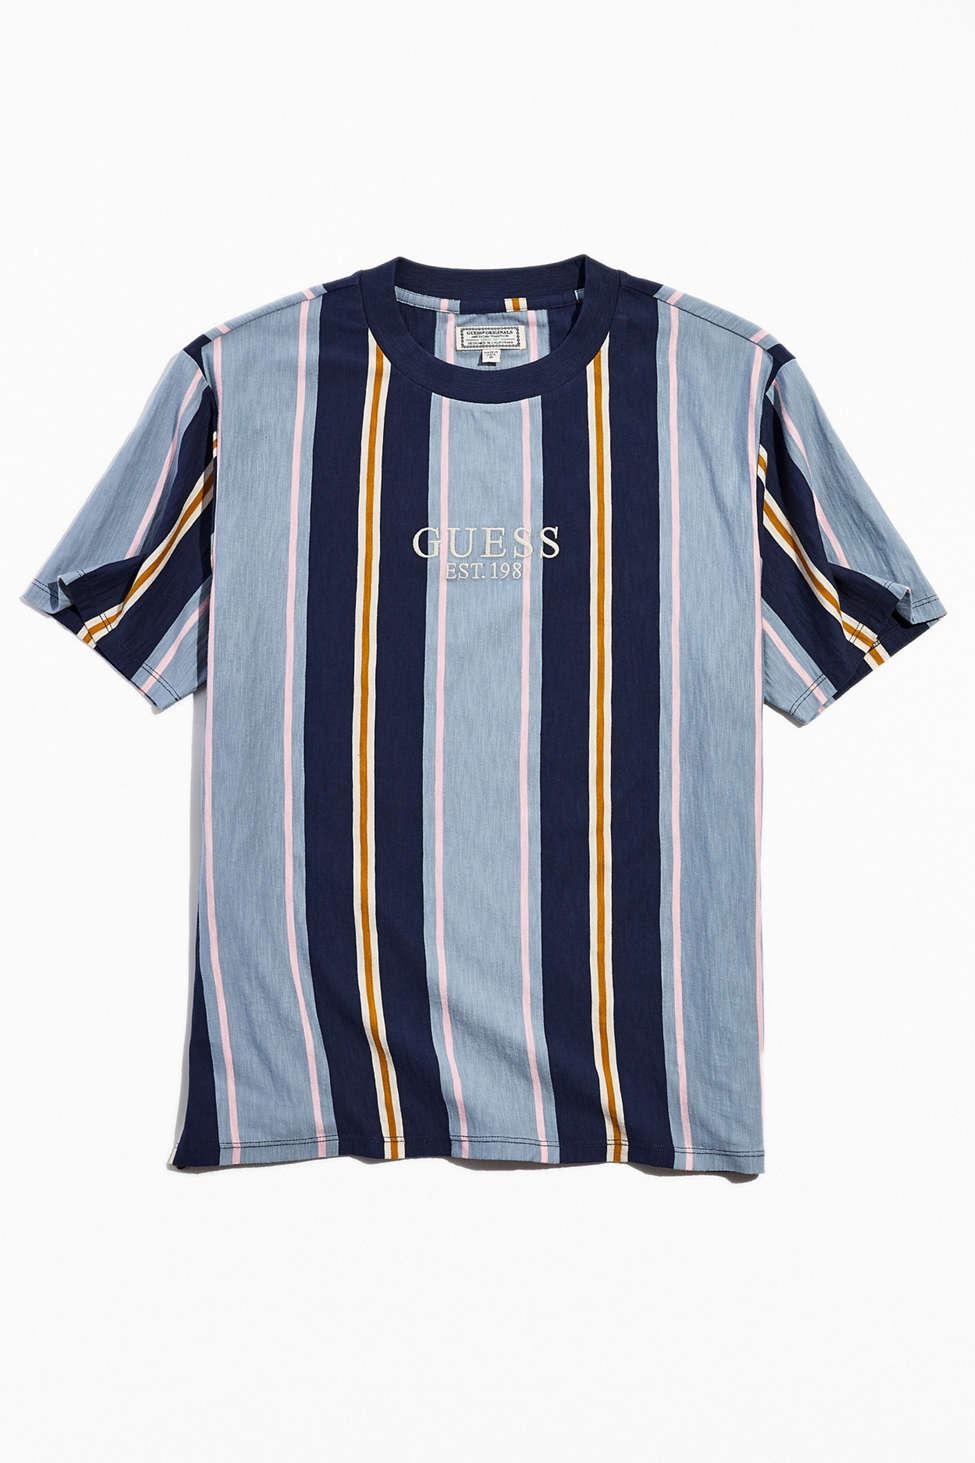 Guess Cotton Originals Uo Exclusive Yacht Club Stripe Tee in Blue for Men -  Lyst